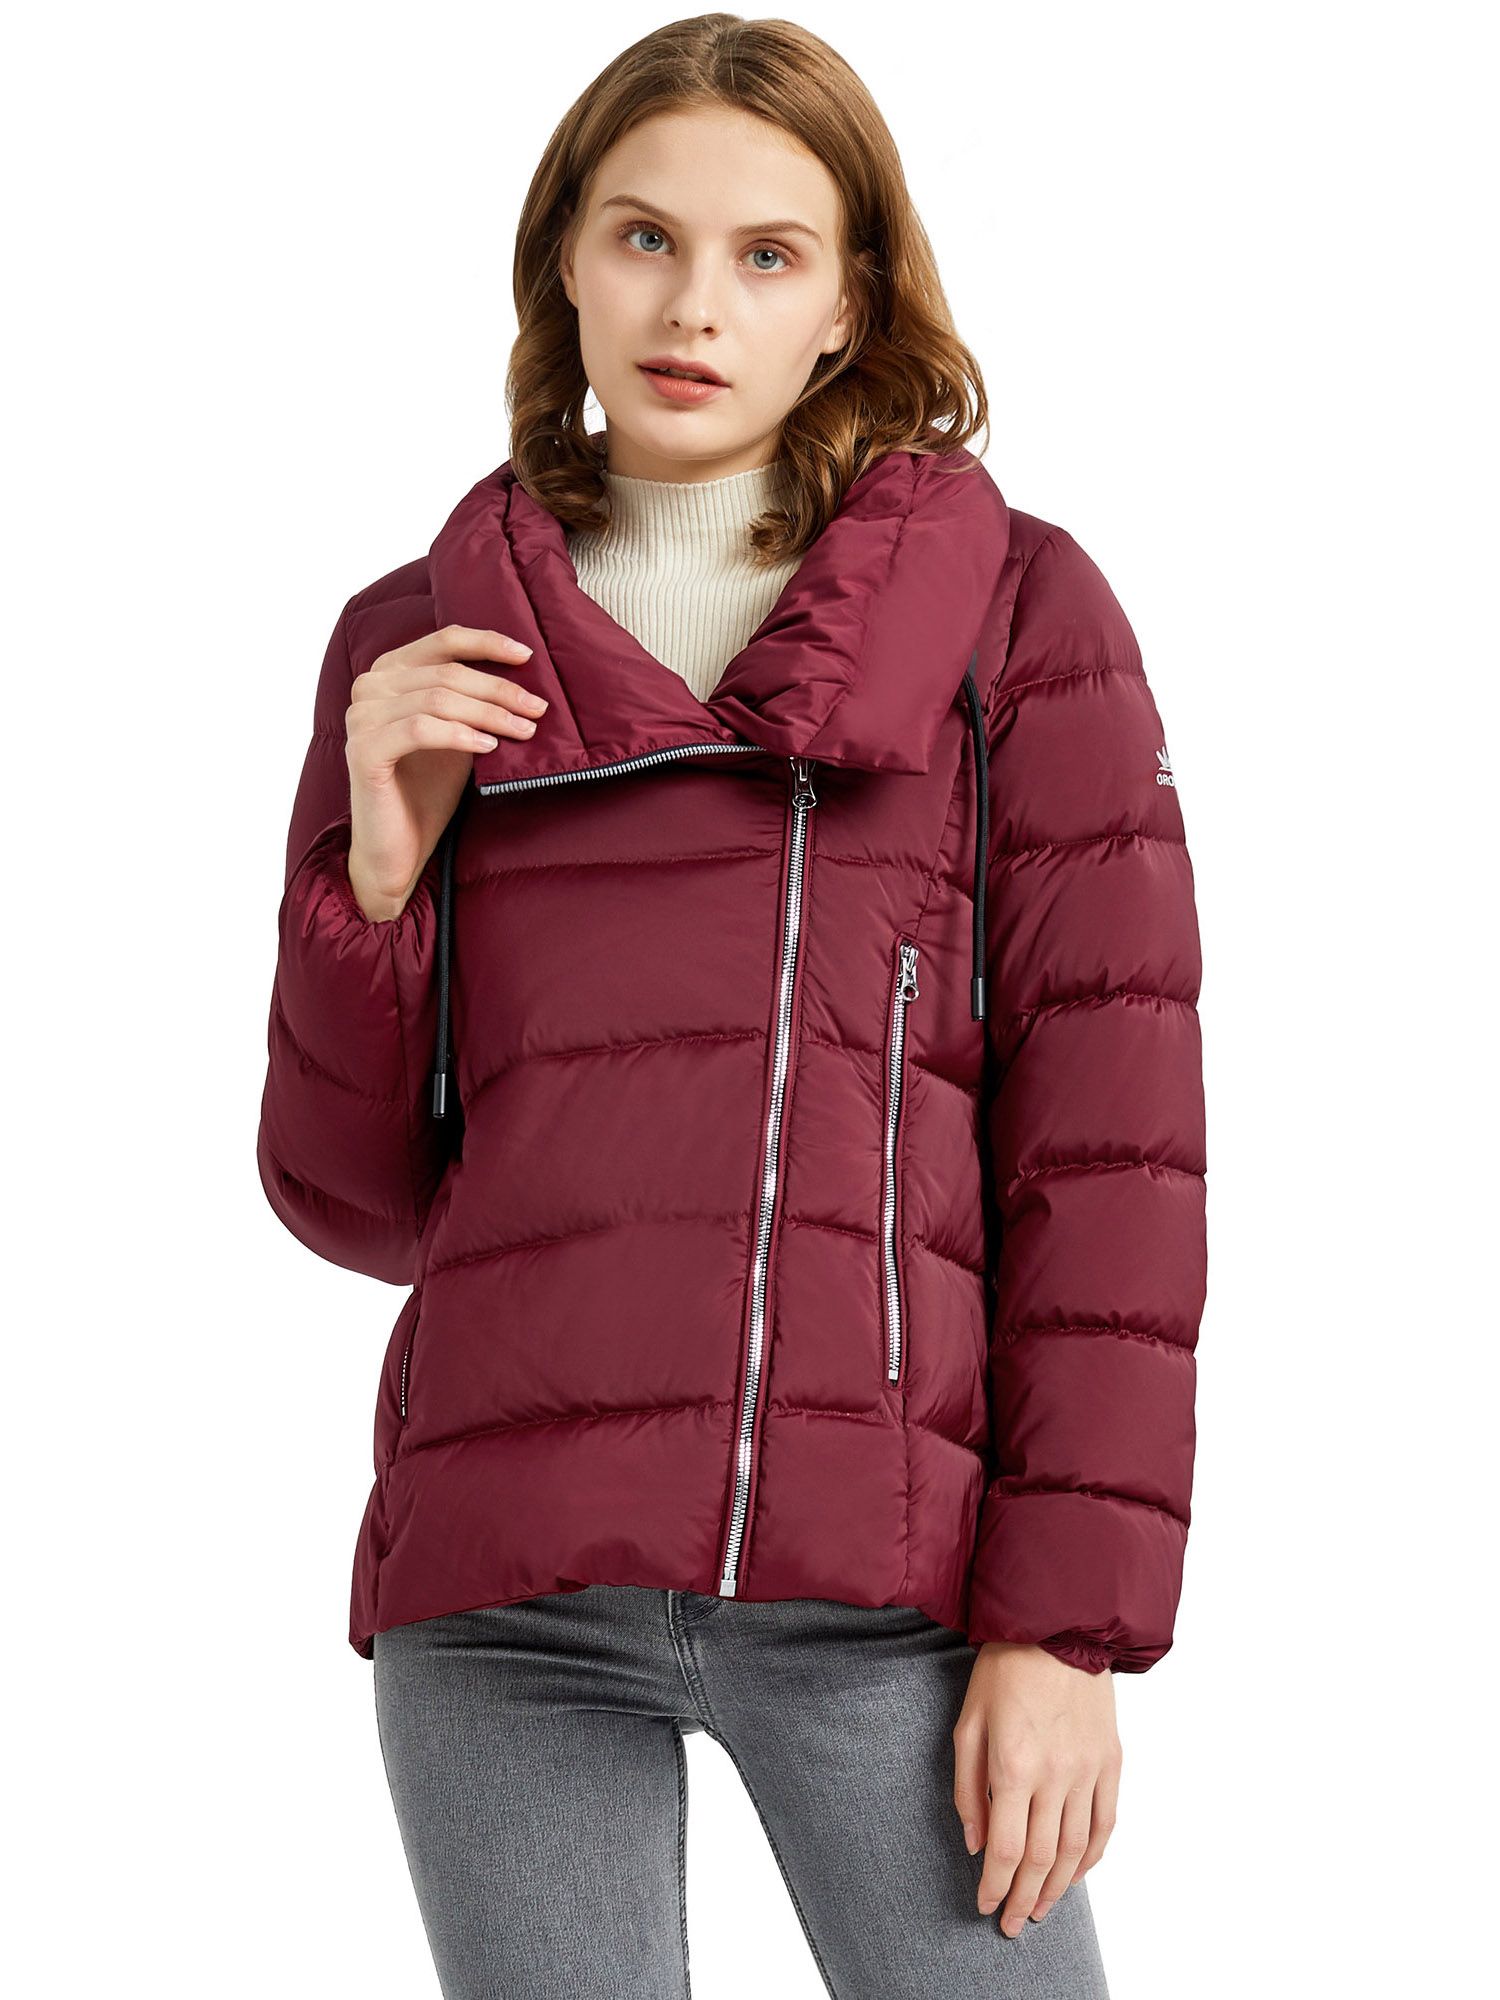 Orolay Hooded Down Jacket Women Winter Stand Collar Oblique Placket Puffer Coat - image 1 of 5